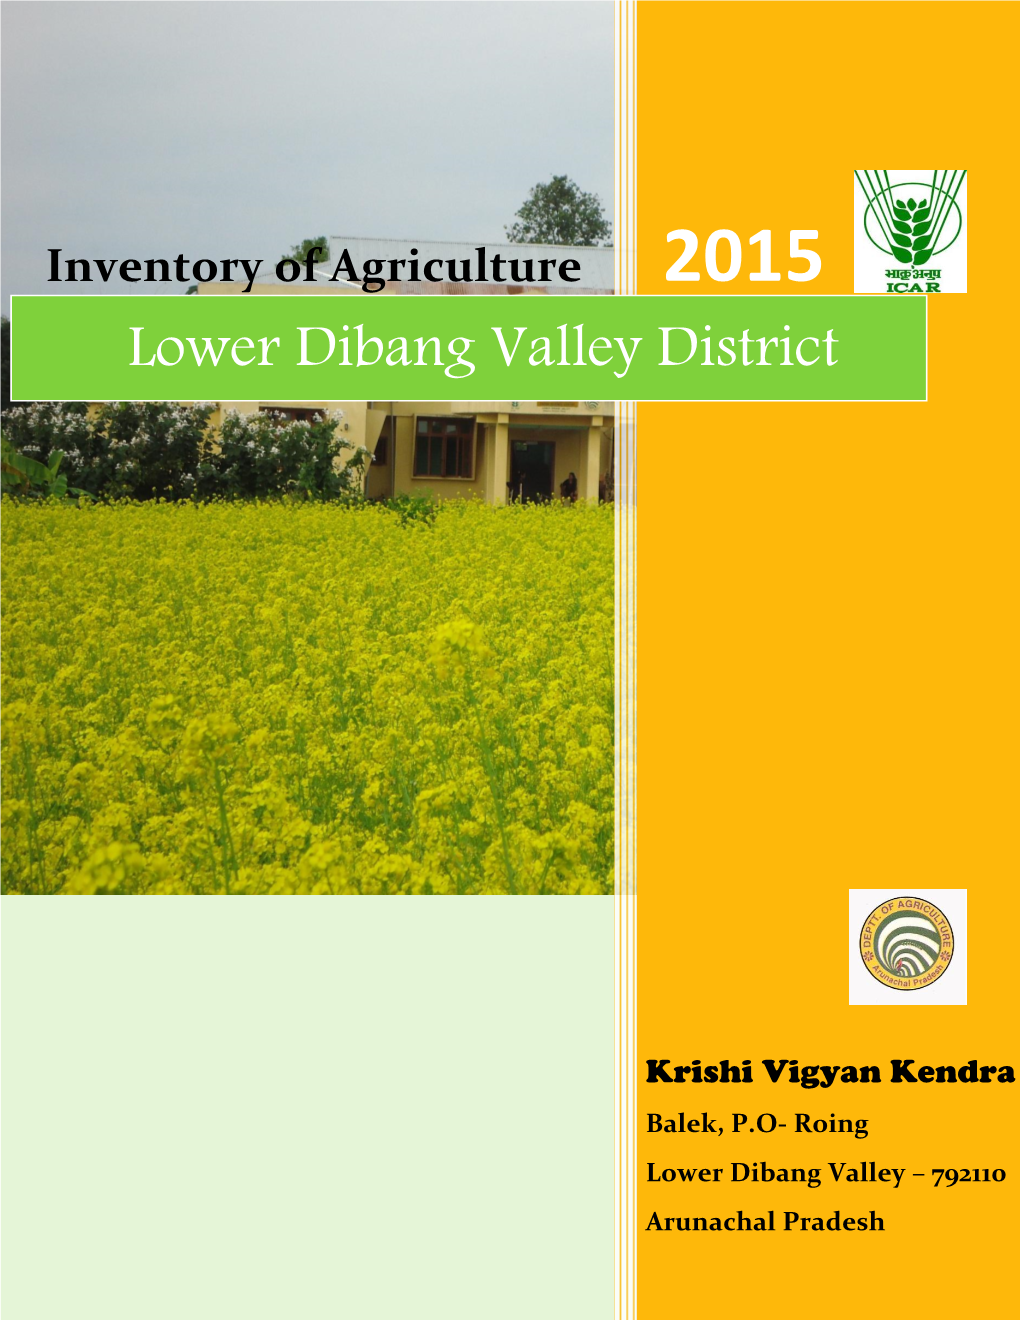 Inventory of Agriculture 2015